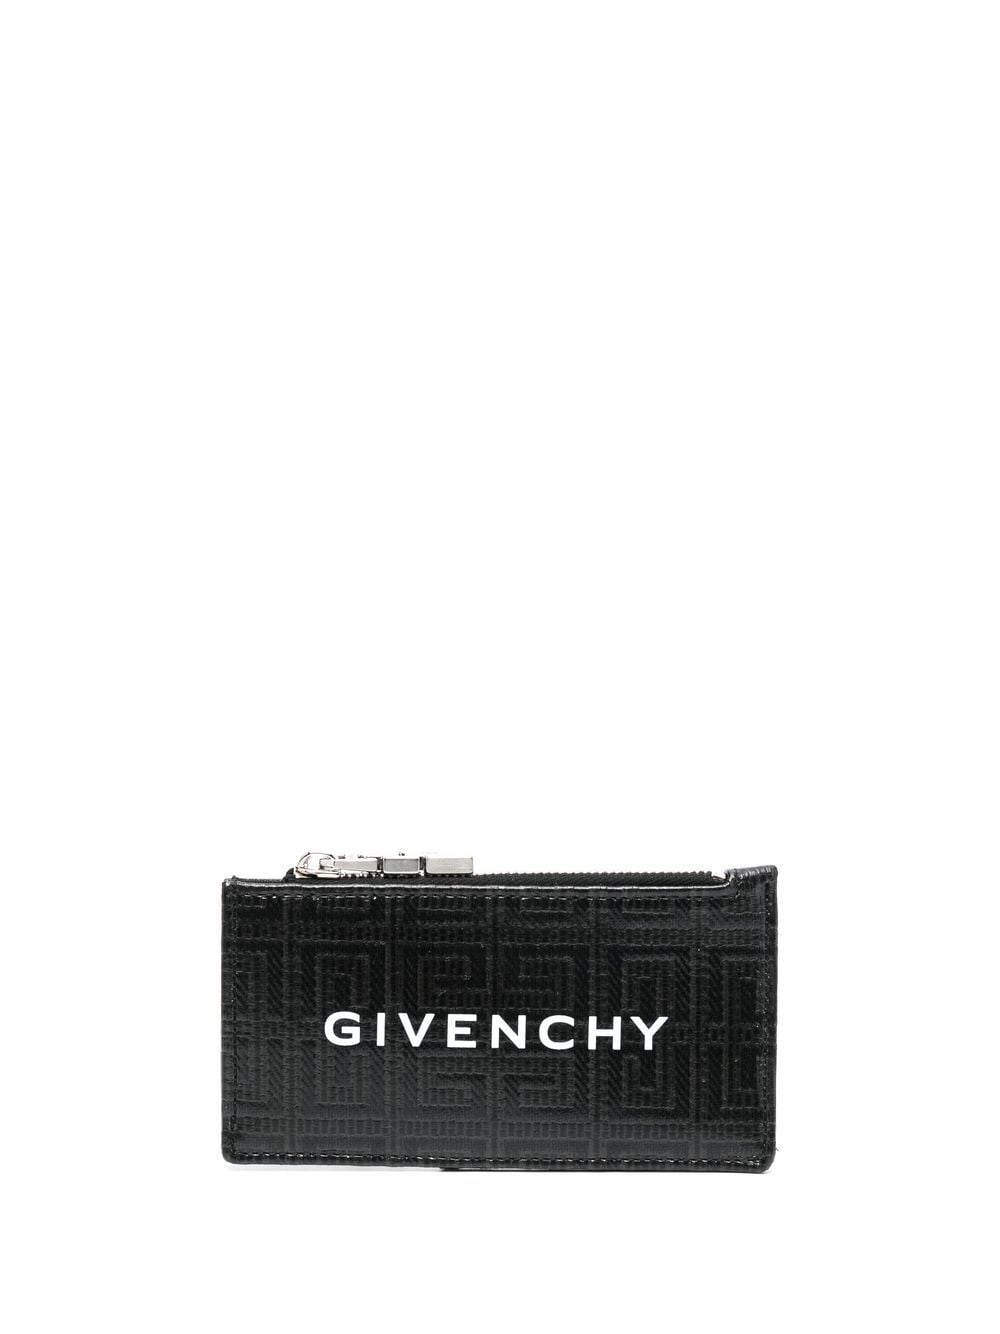 Givenchy Zipped Card Holder - Loschi Boutique